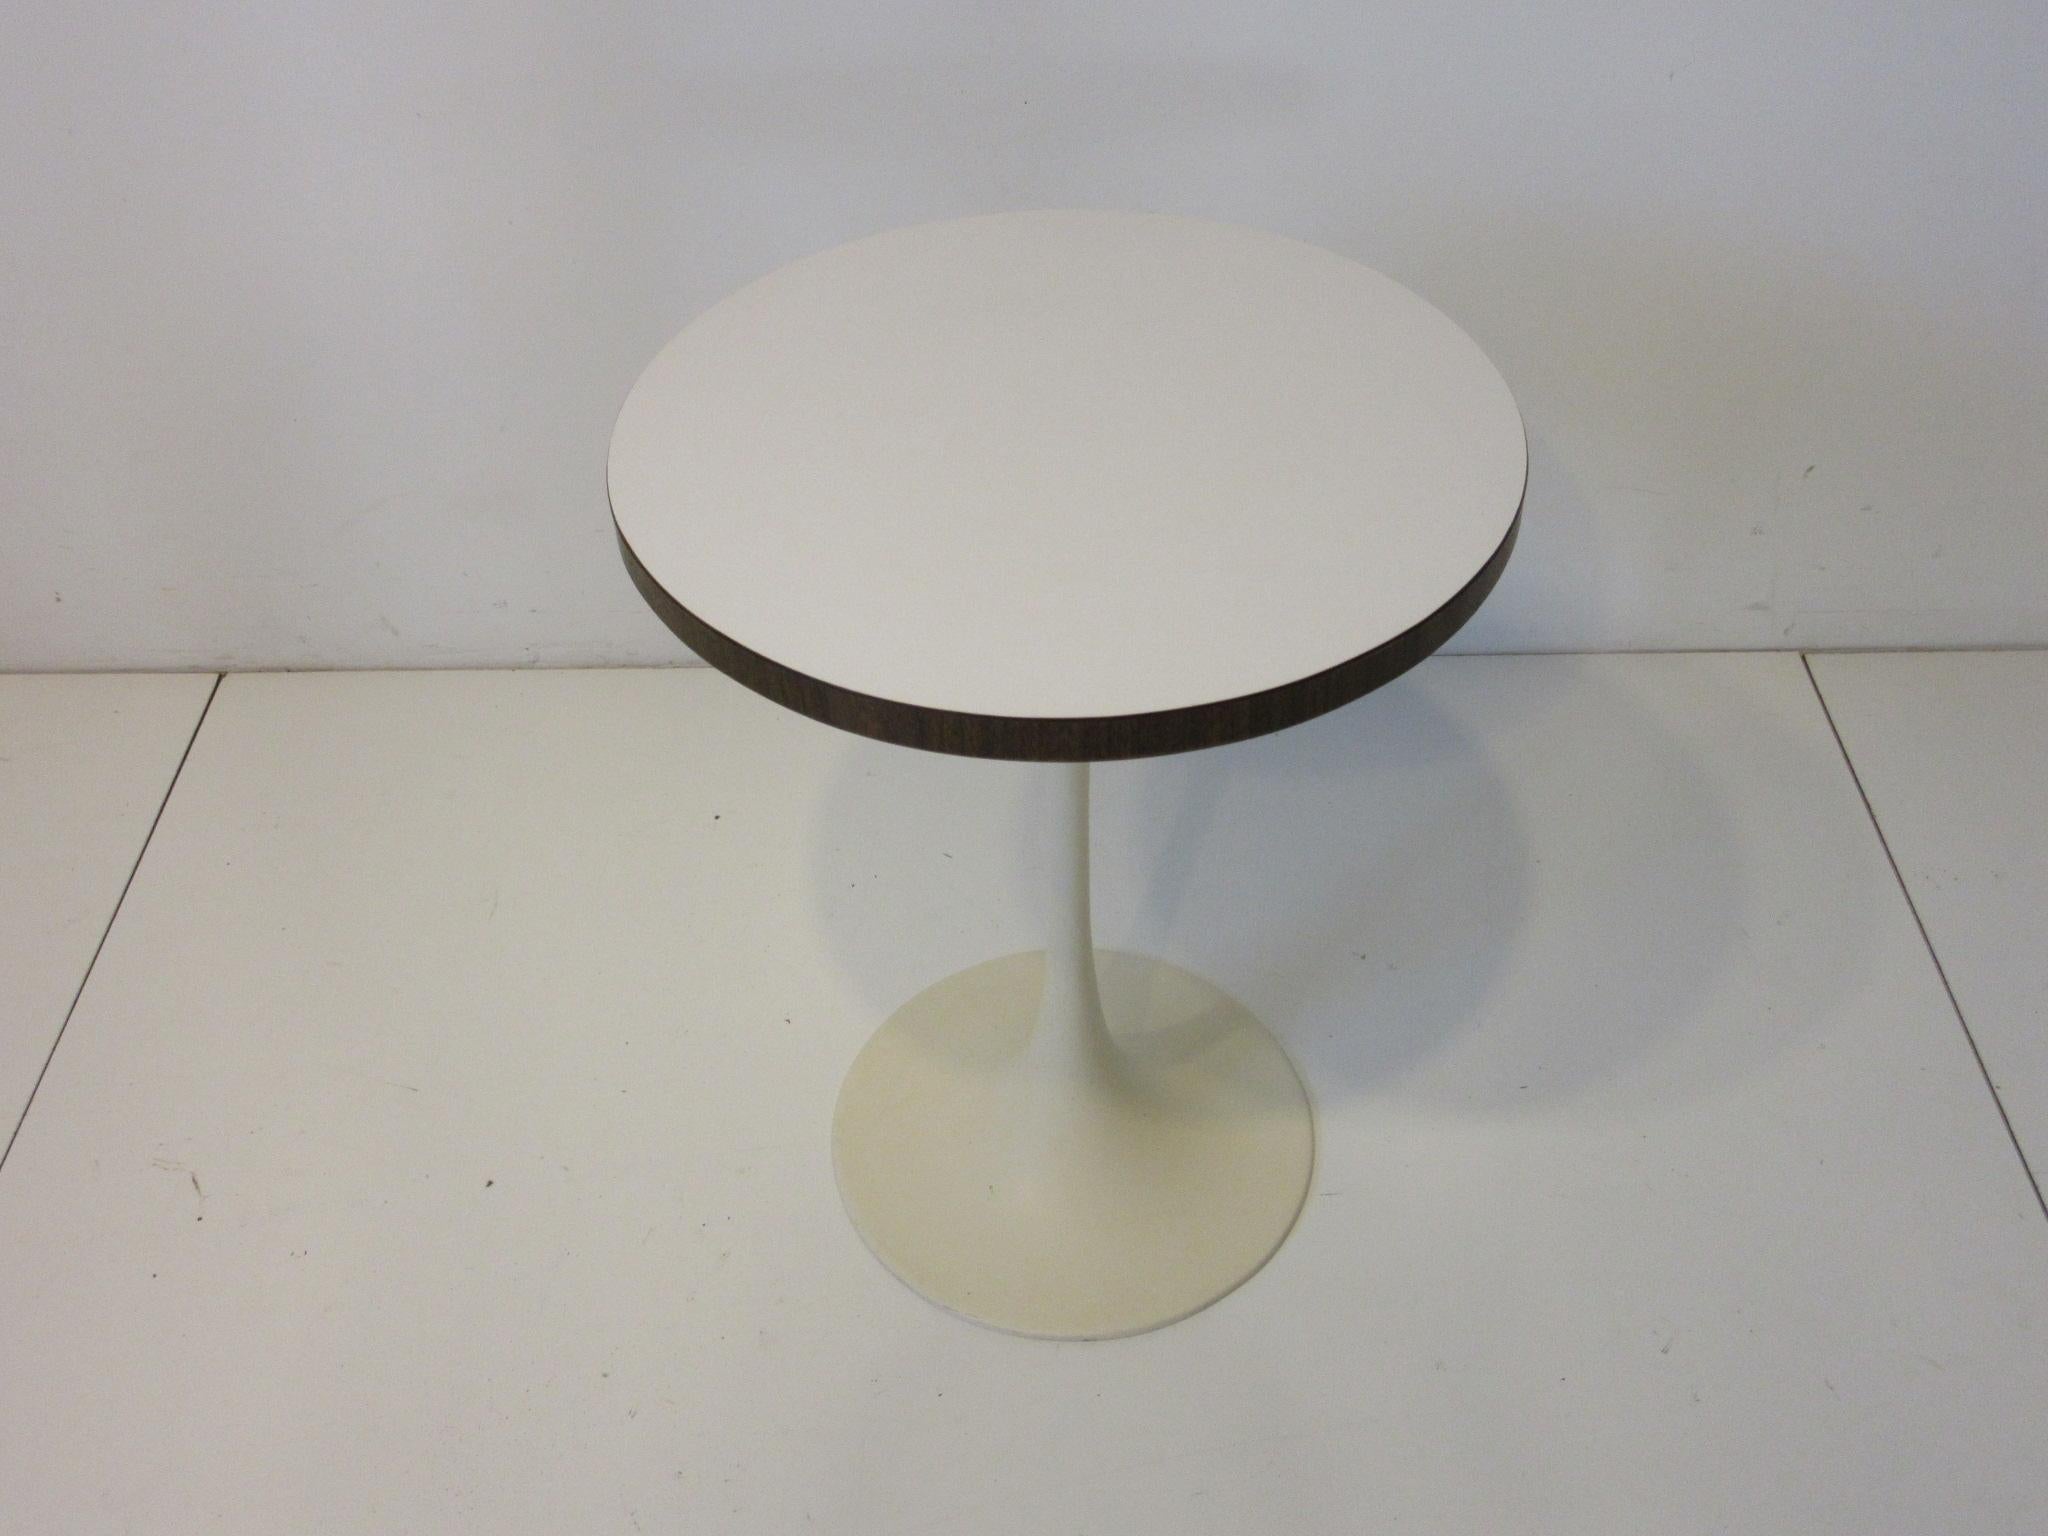 A smaller sized tulip side table with darker faux wood to the edge and cream white laminate top and cast metal base in the style of Eero Saarinen and Knoll. Manufactured by the Burke Furniture company and designed by Maurice Burke.